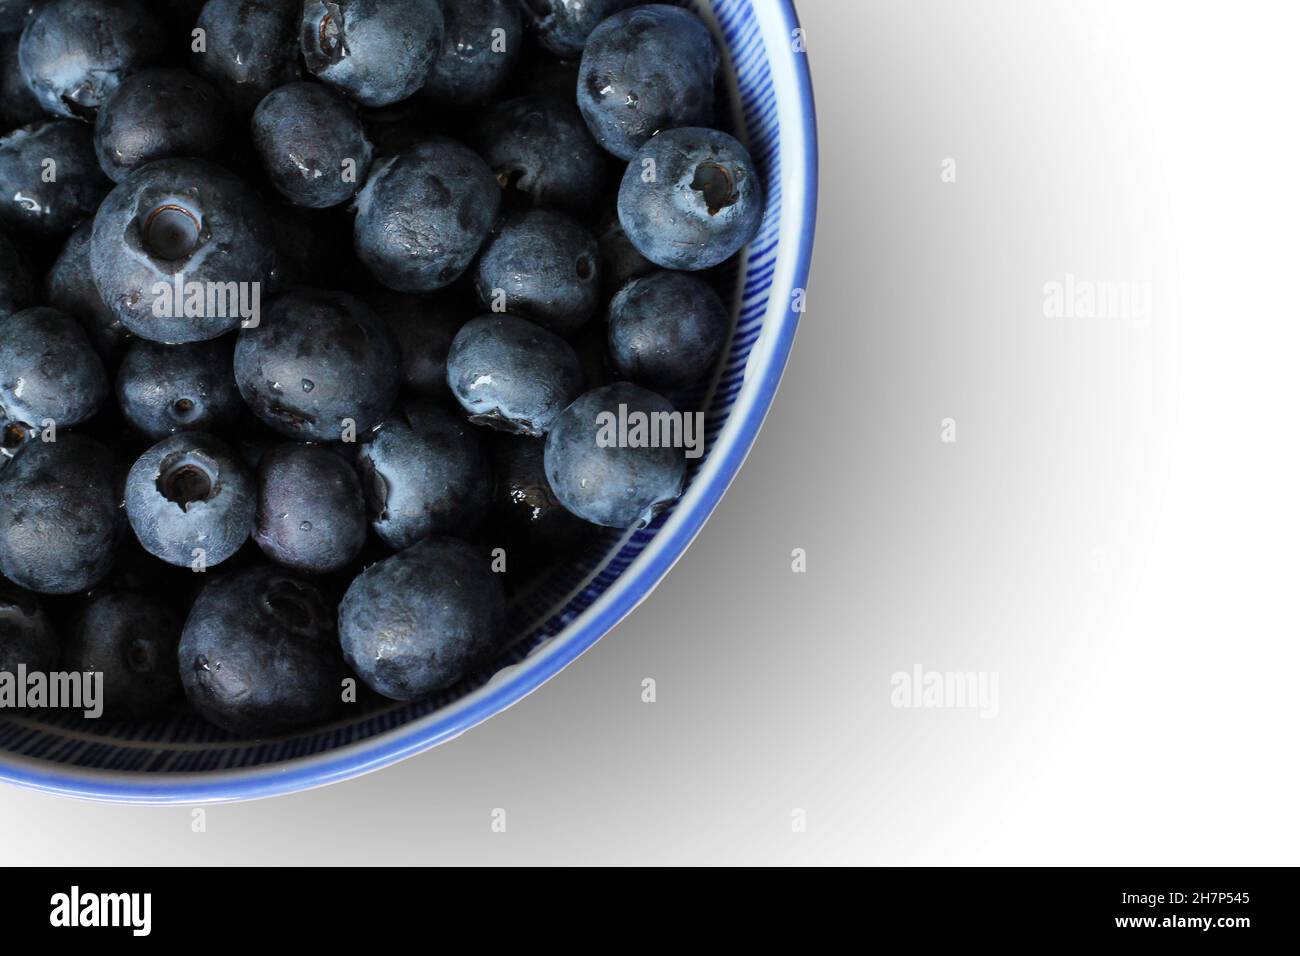 Top view of fresh blueberry in bowl on white background. Healthy food concept. Stock Photo